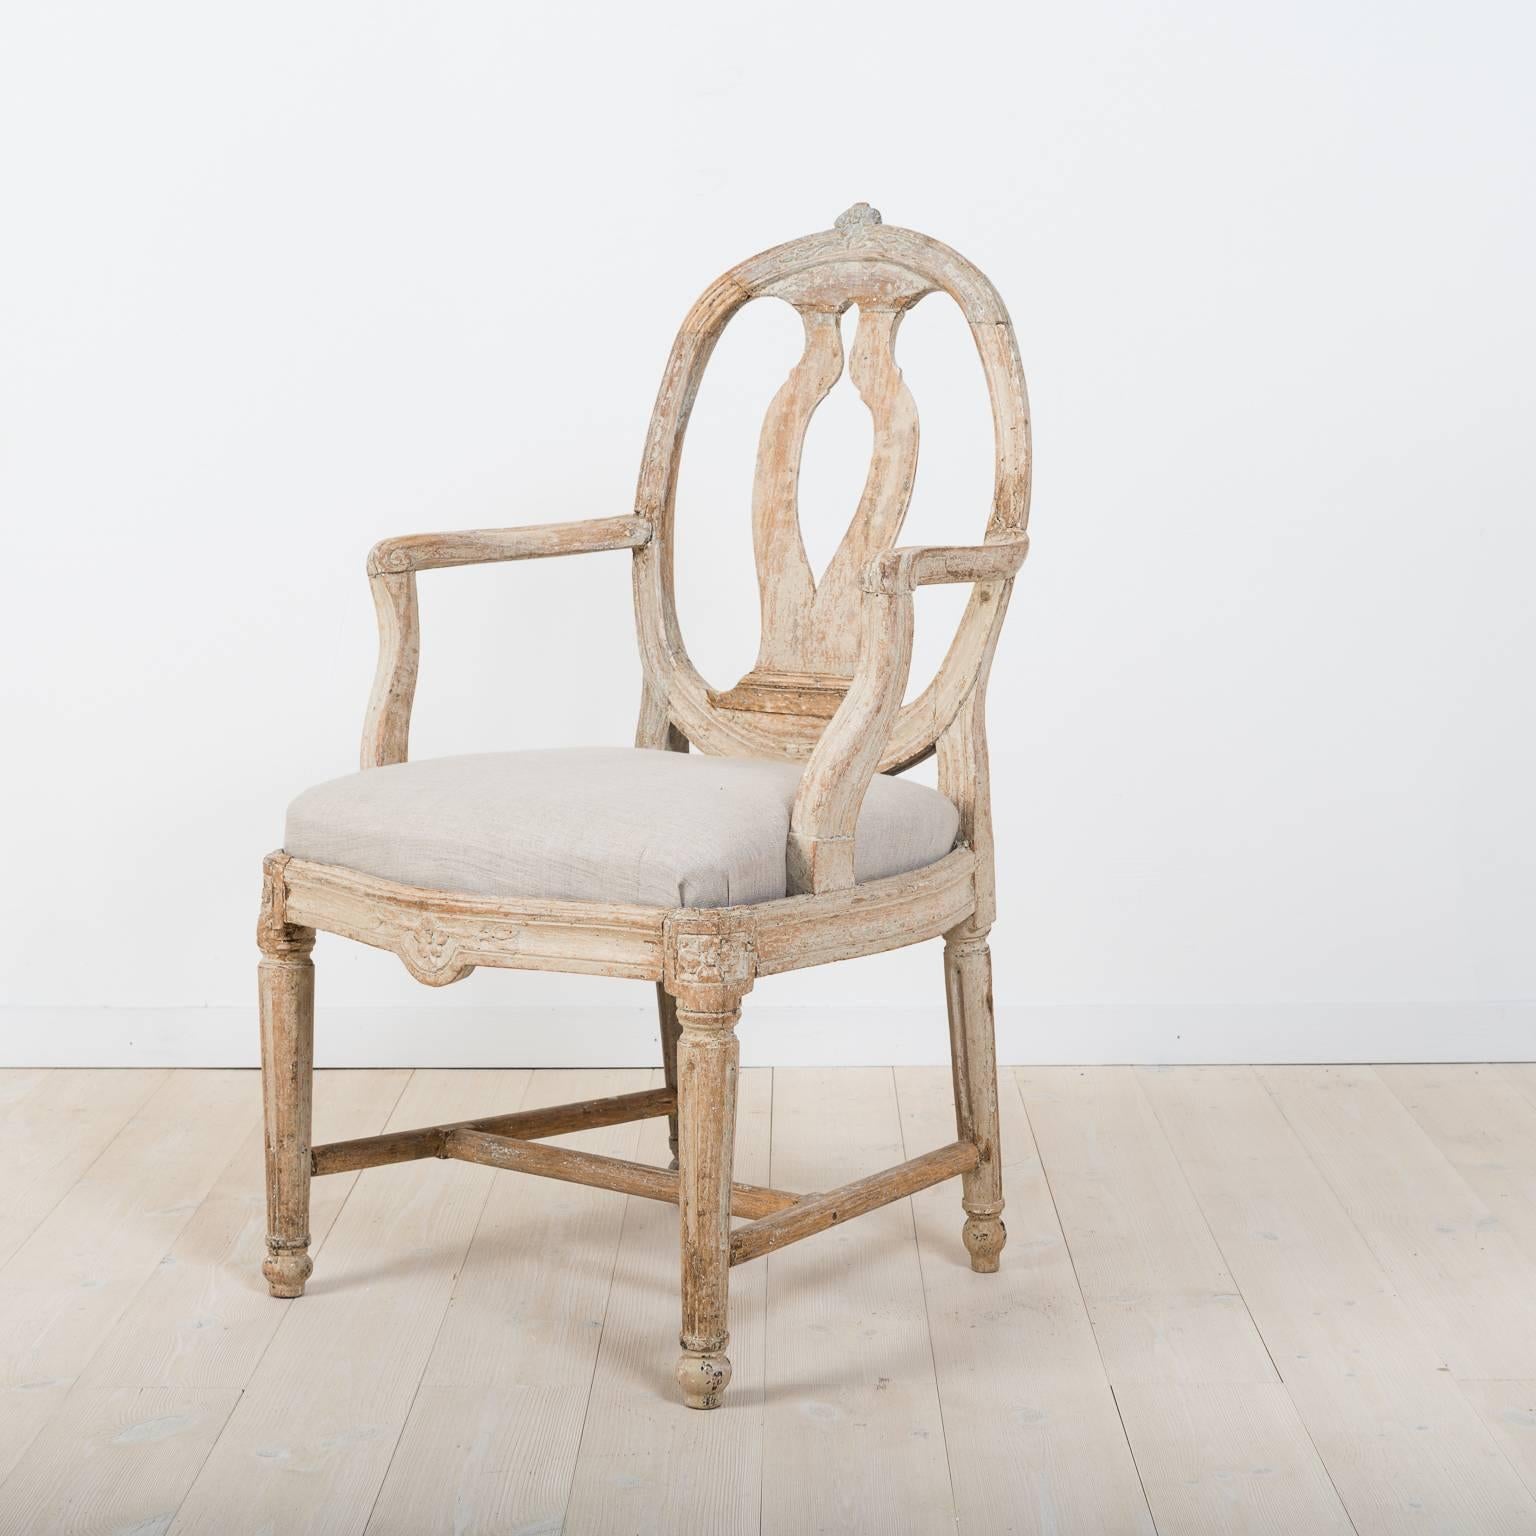 Gustavian armchair in the so called 